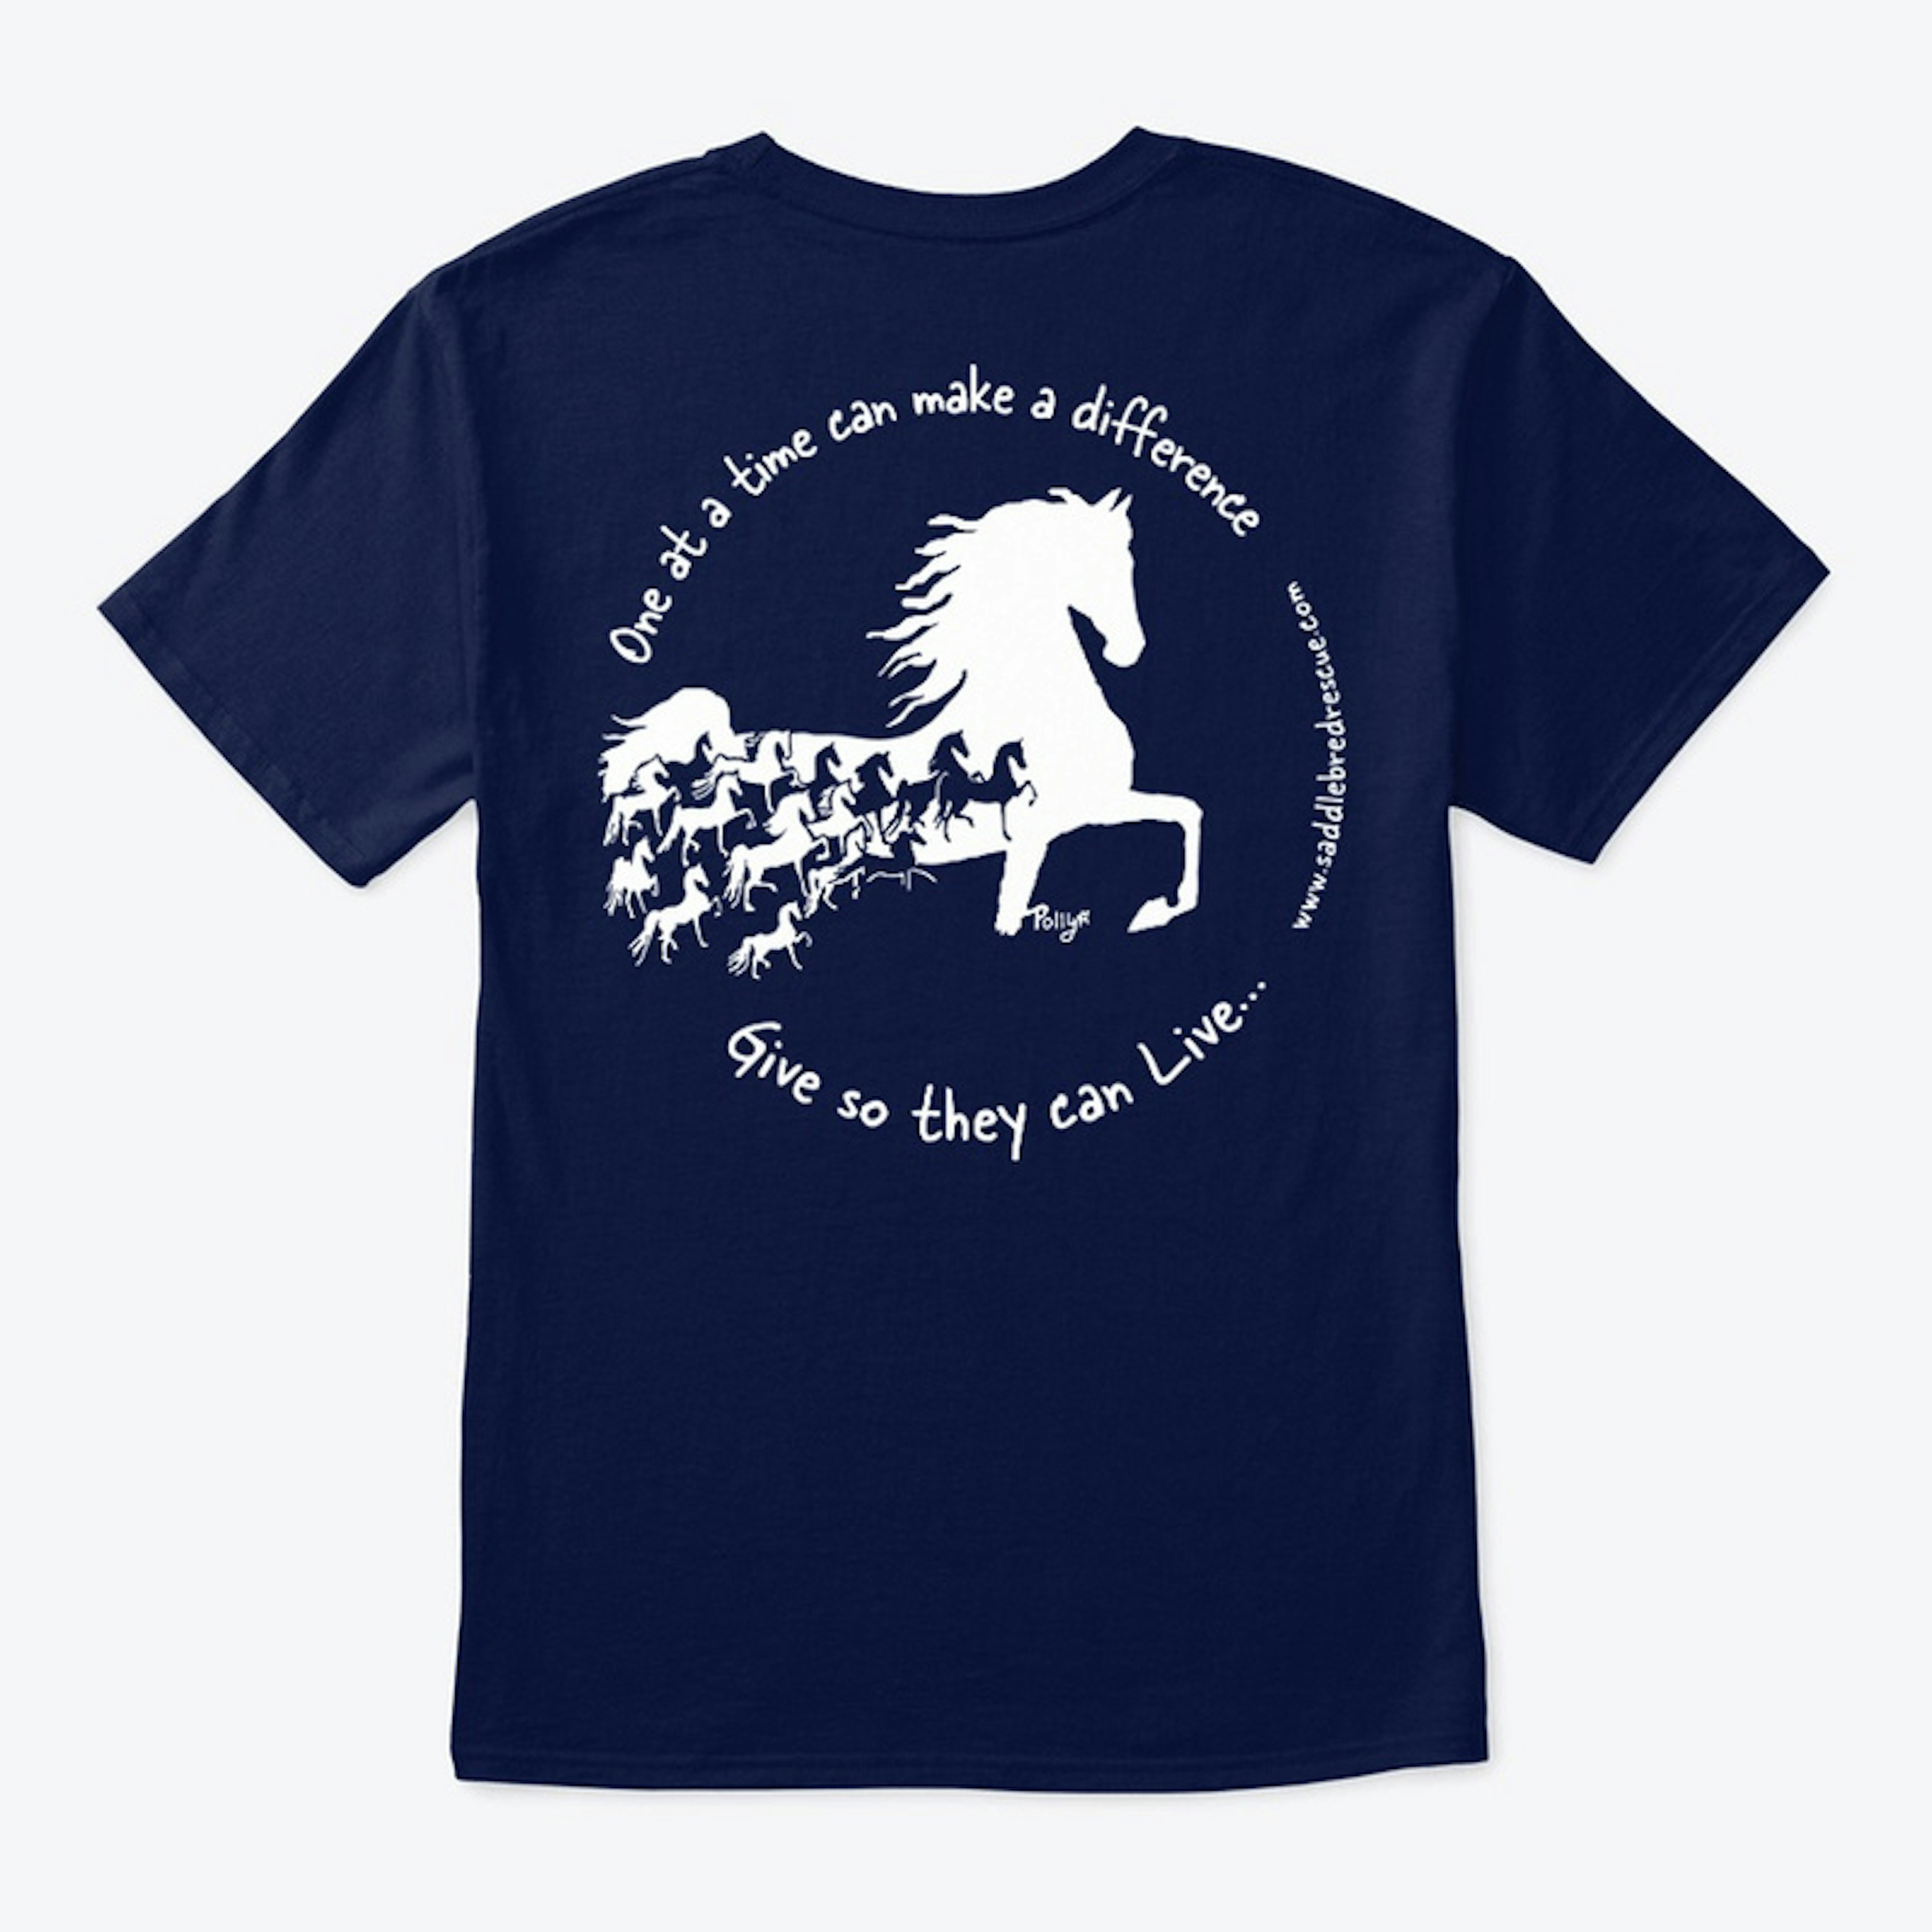 SBR Give so they can live T-Shirt